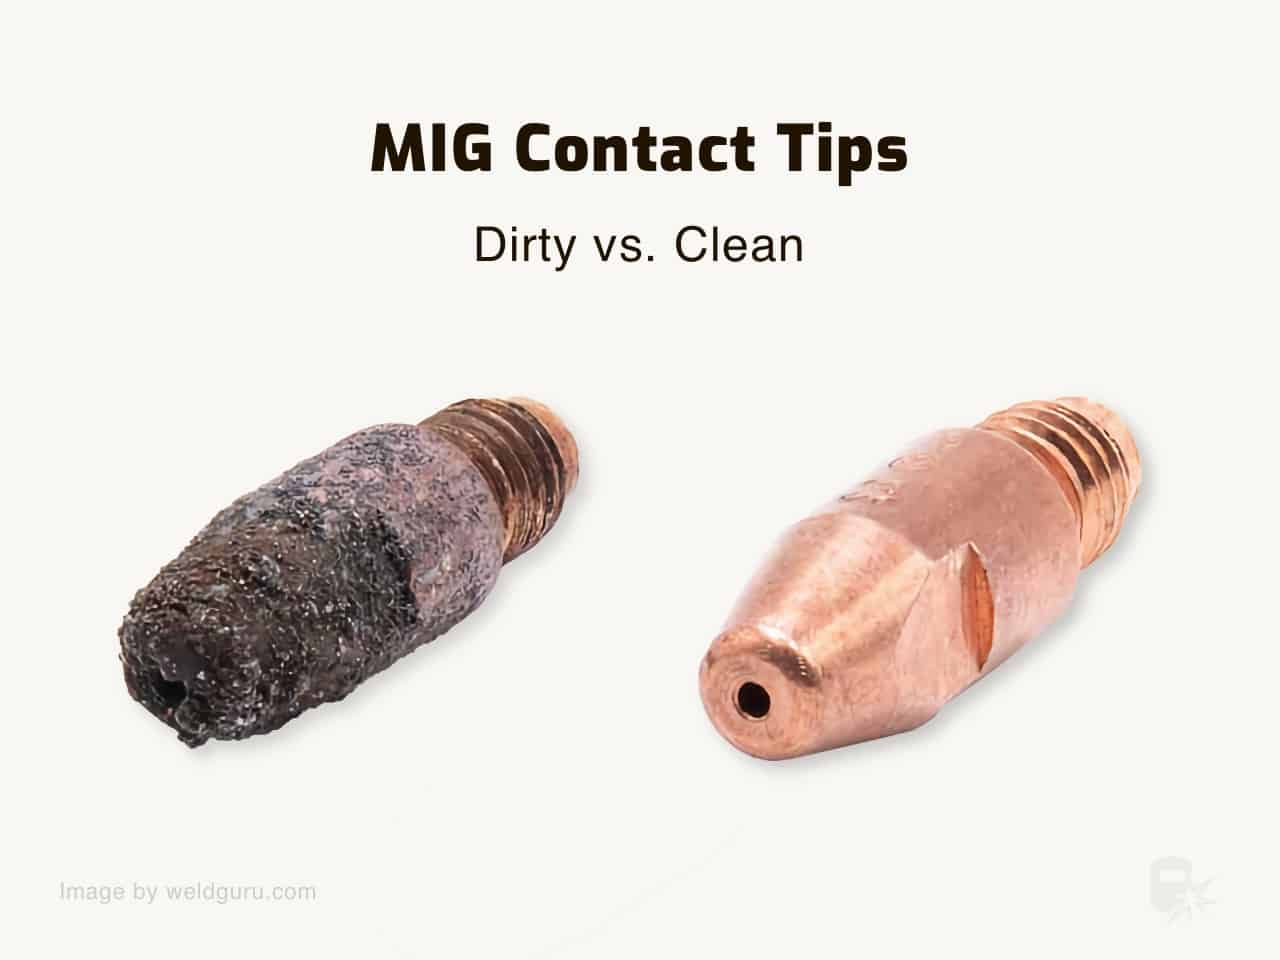 dirty vs clean mig contact tips